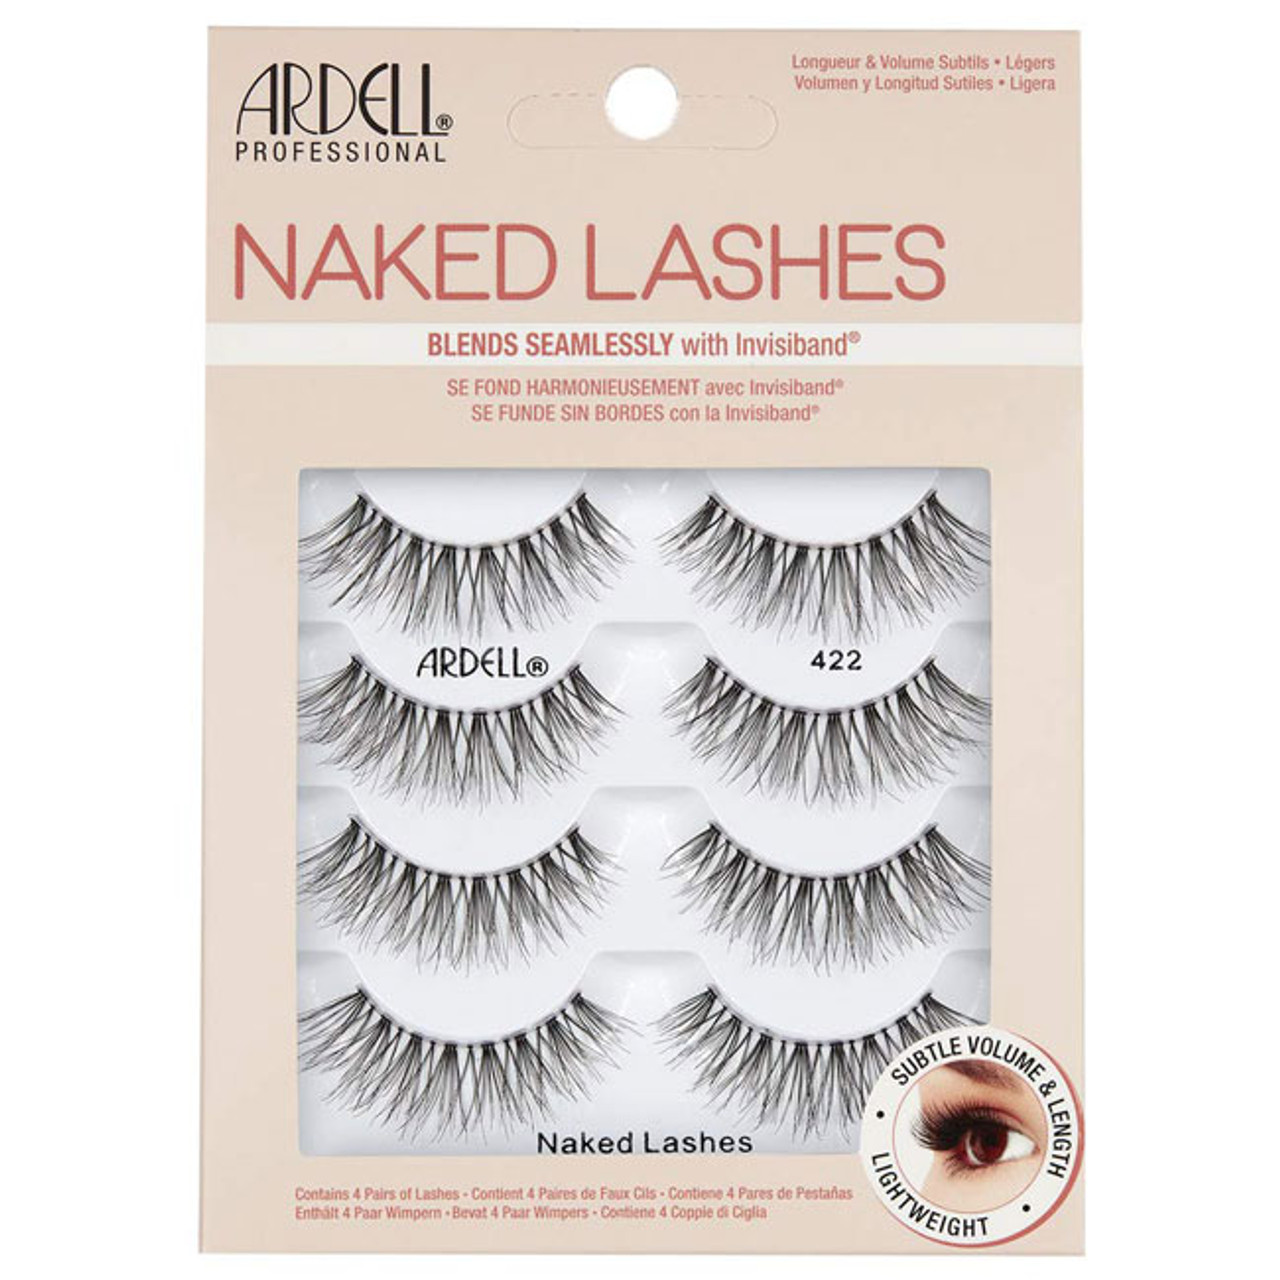 Ardell Professional Naked Lashes # 422 - 4 Pairs / 1 Pack